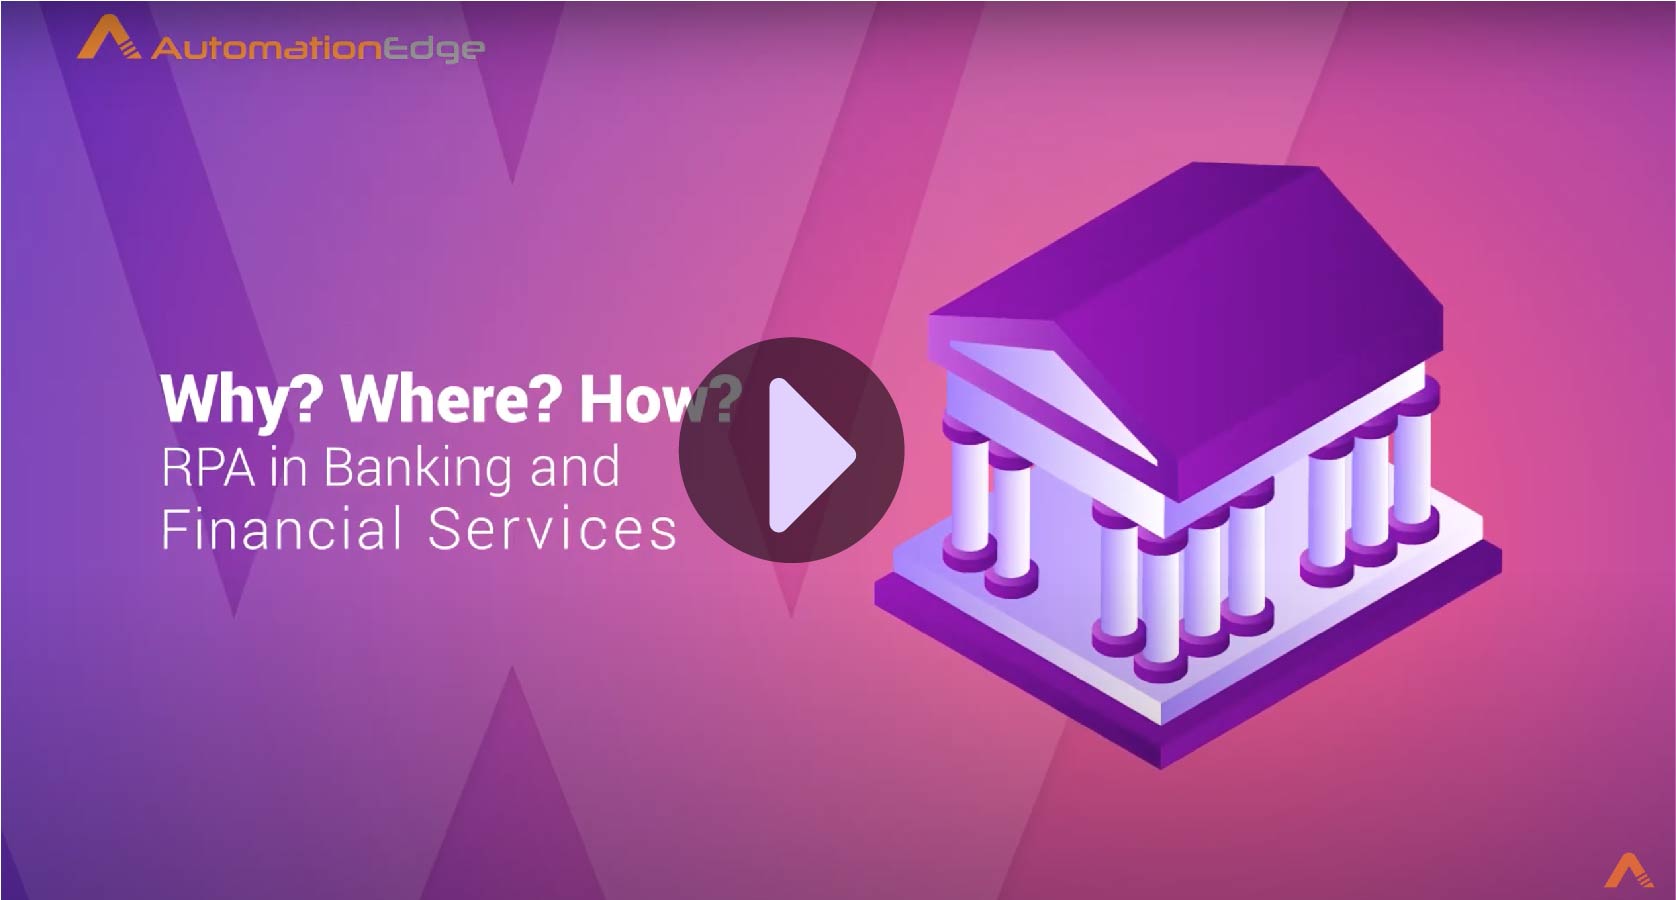 Learn Why? Where? How? RPA in Banking and Financial Services with AutomationEdge